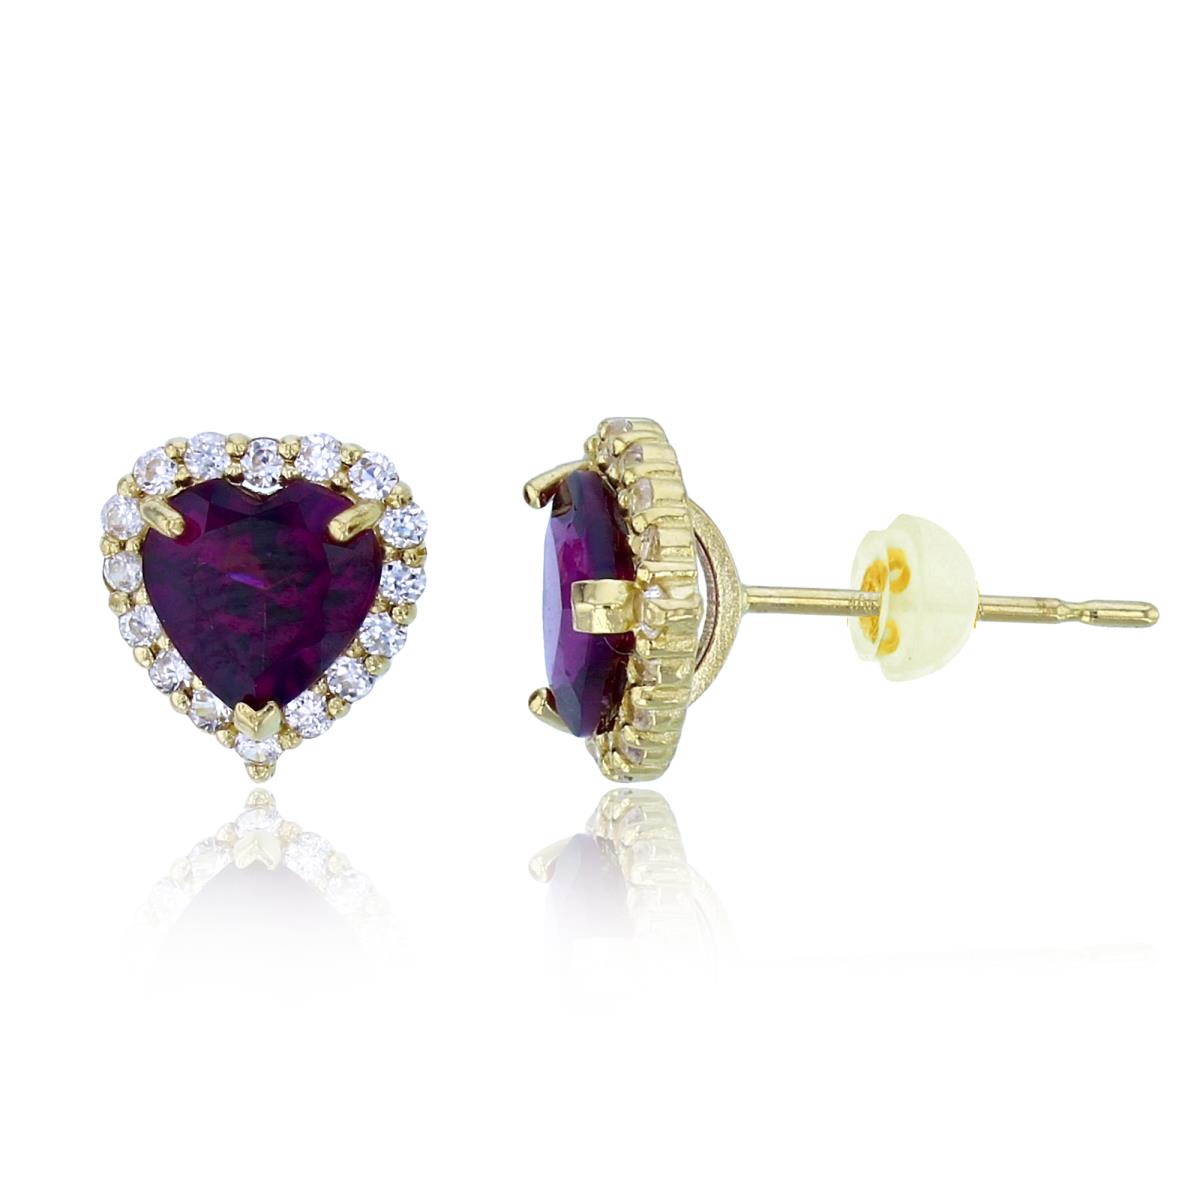 10K Yellow Gold 6mm HS Rhodolite & Wh.Zircon Halo Heart Studs with Silicon Backs